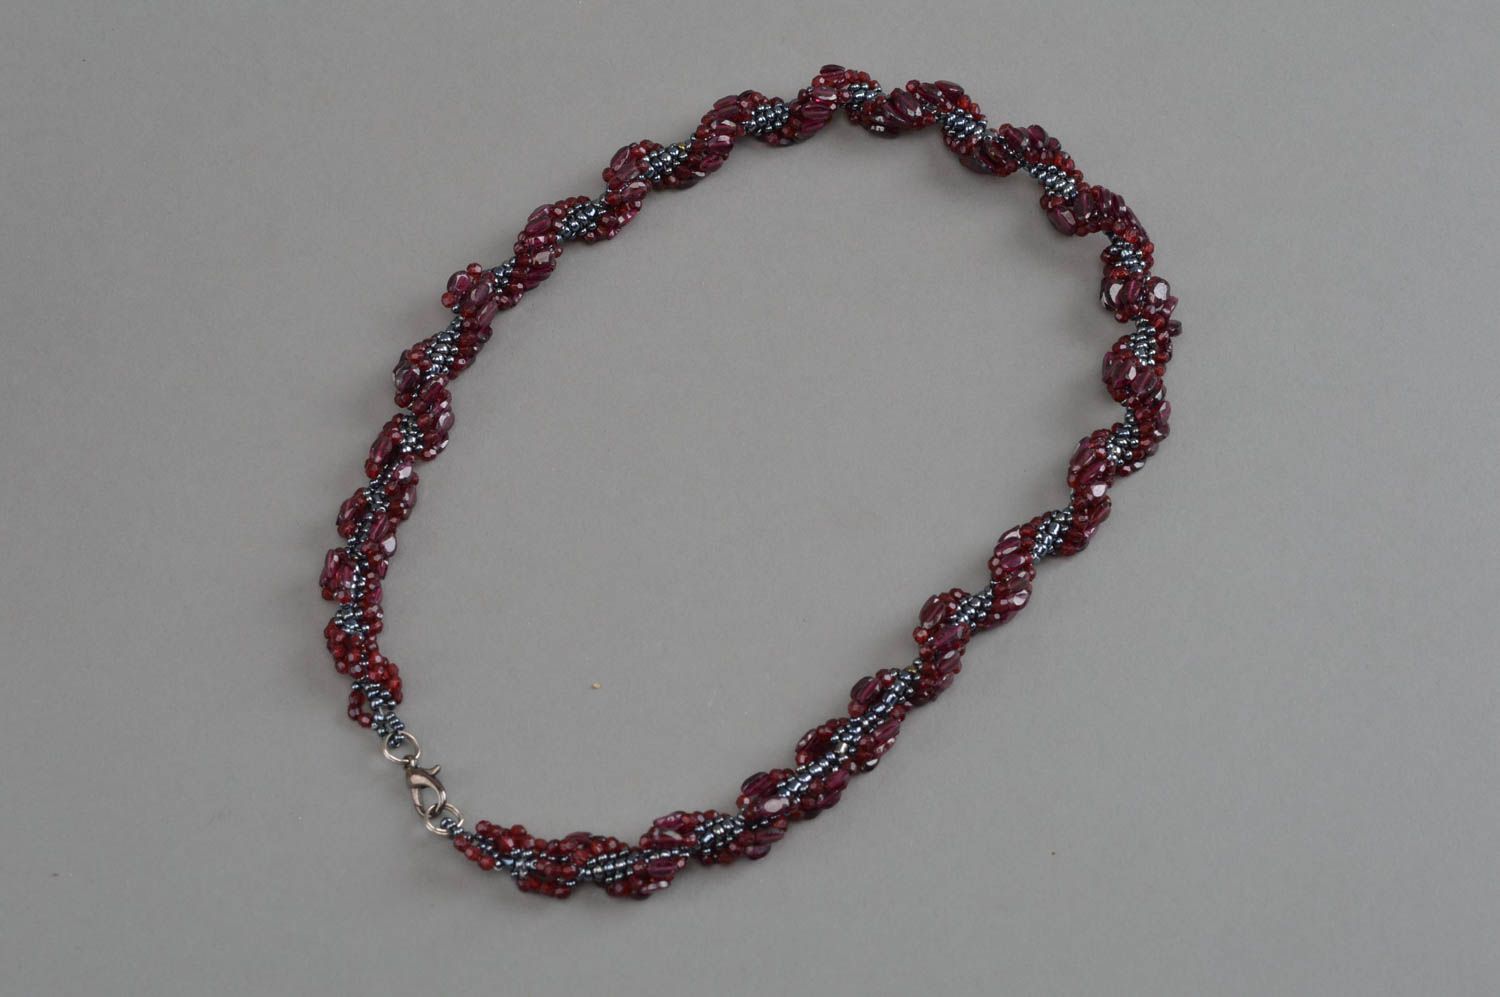 Handmade necklace with garnet beads jewelry with natural stones for women photo 2